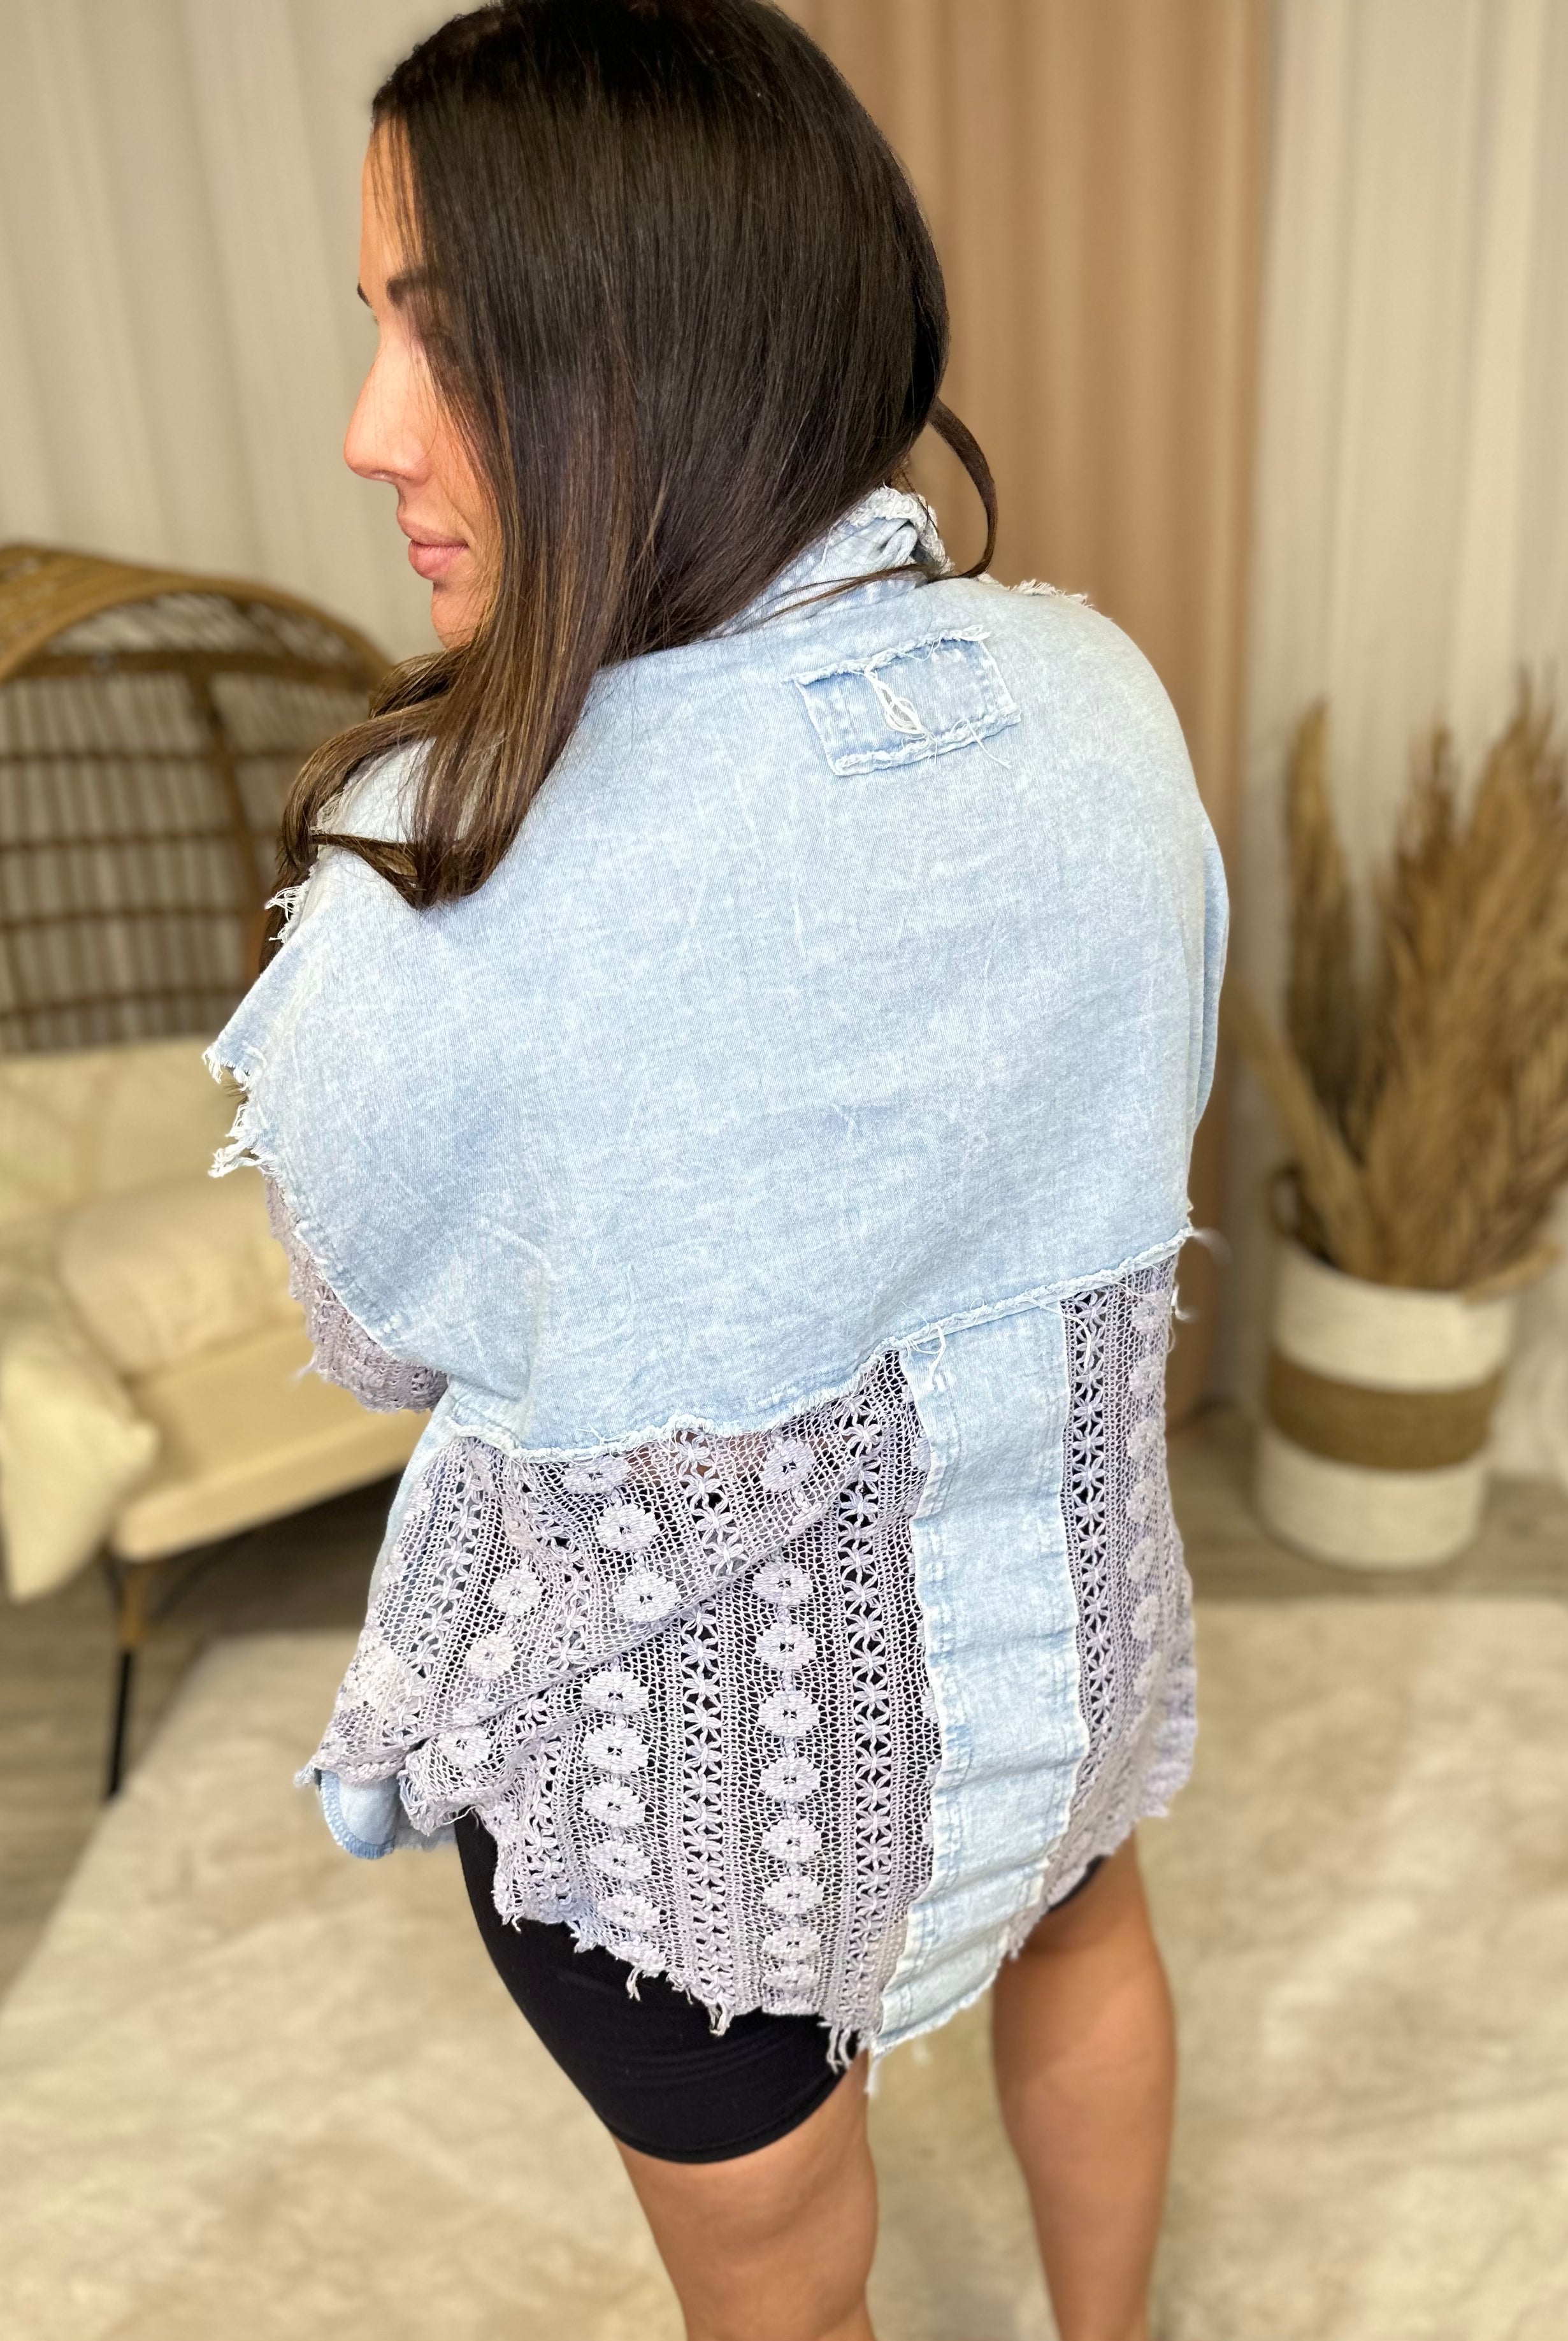 RESTOCK : Got Your Back Button Down Top-120 Long Sleeve Tops-BlueVelvet-Heathered Boho Boutique, Women's Fashion and Accessories in Palmetto, FL